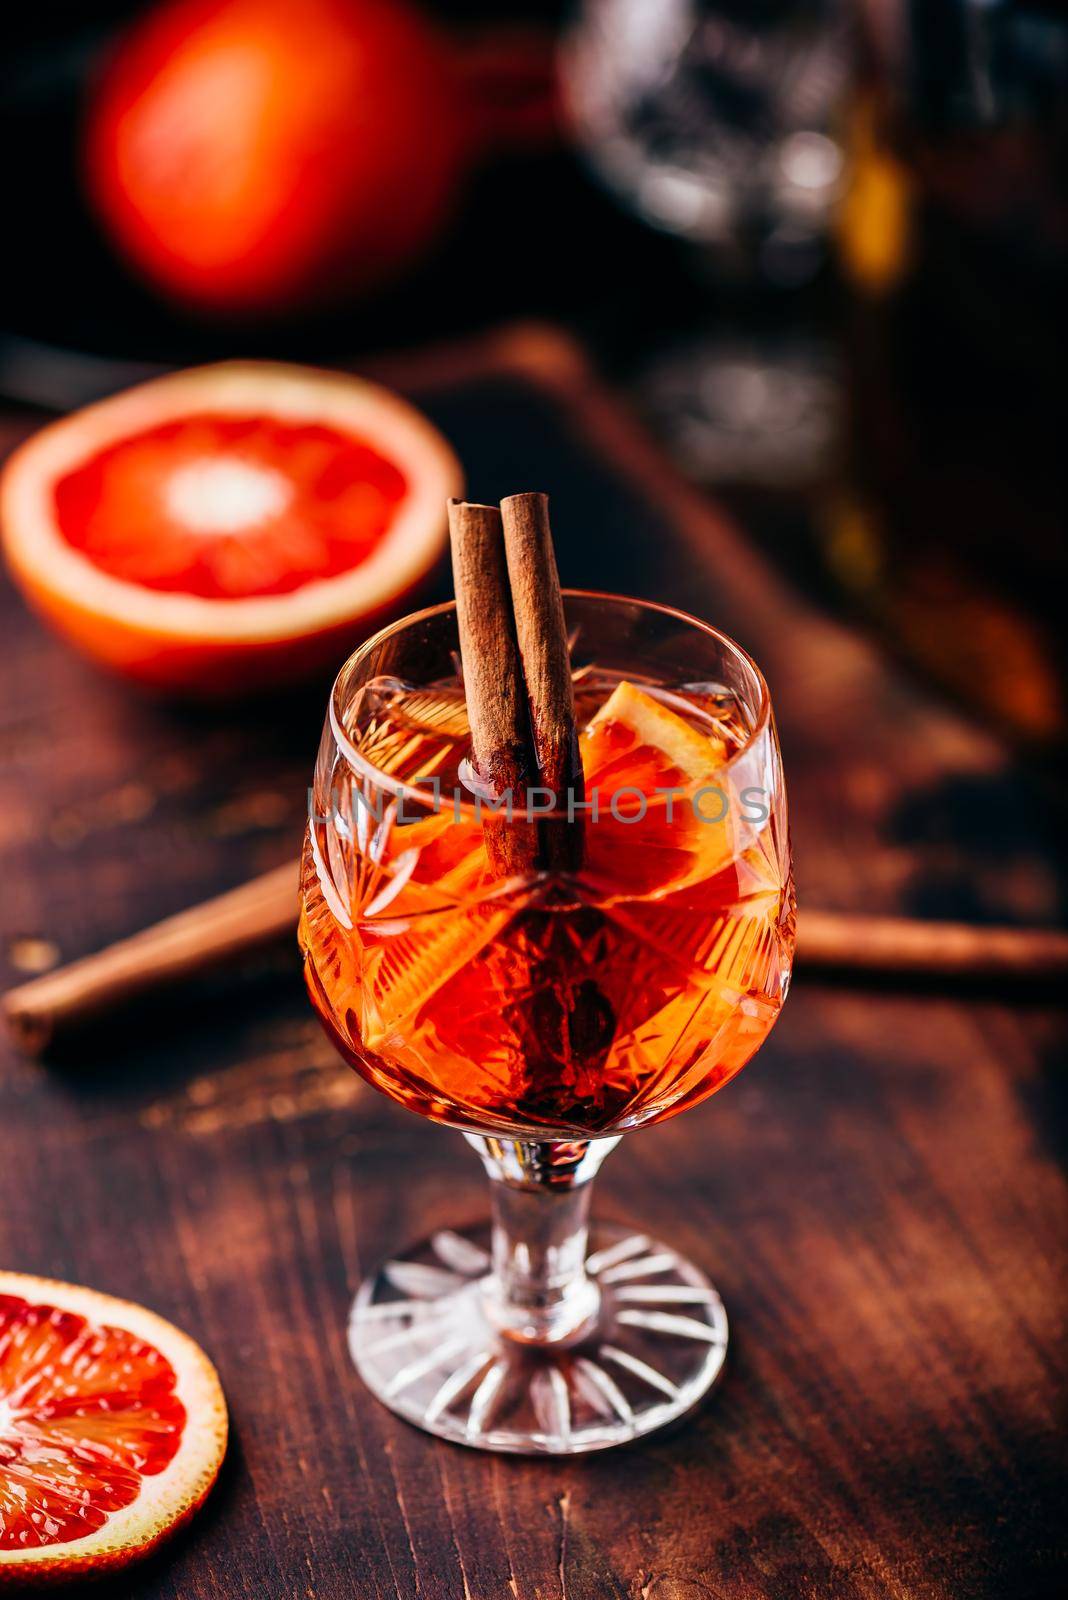 Blood orange whiskey sour cocktail with aged bourbon, blood orange juice, cherry syrup and cinnamon